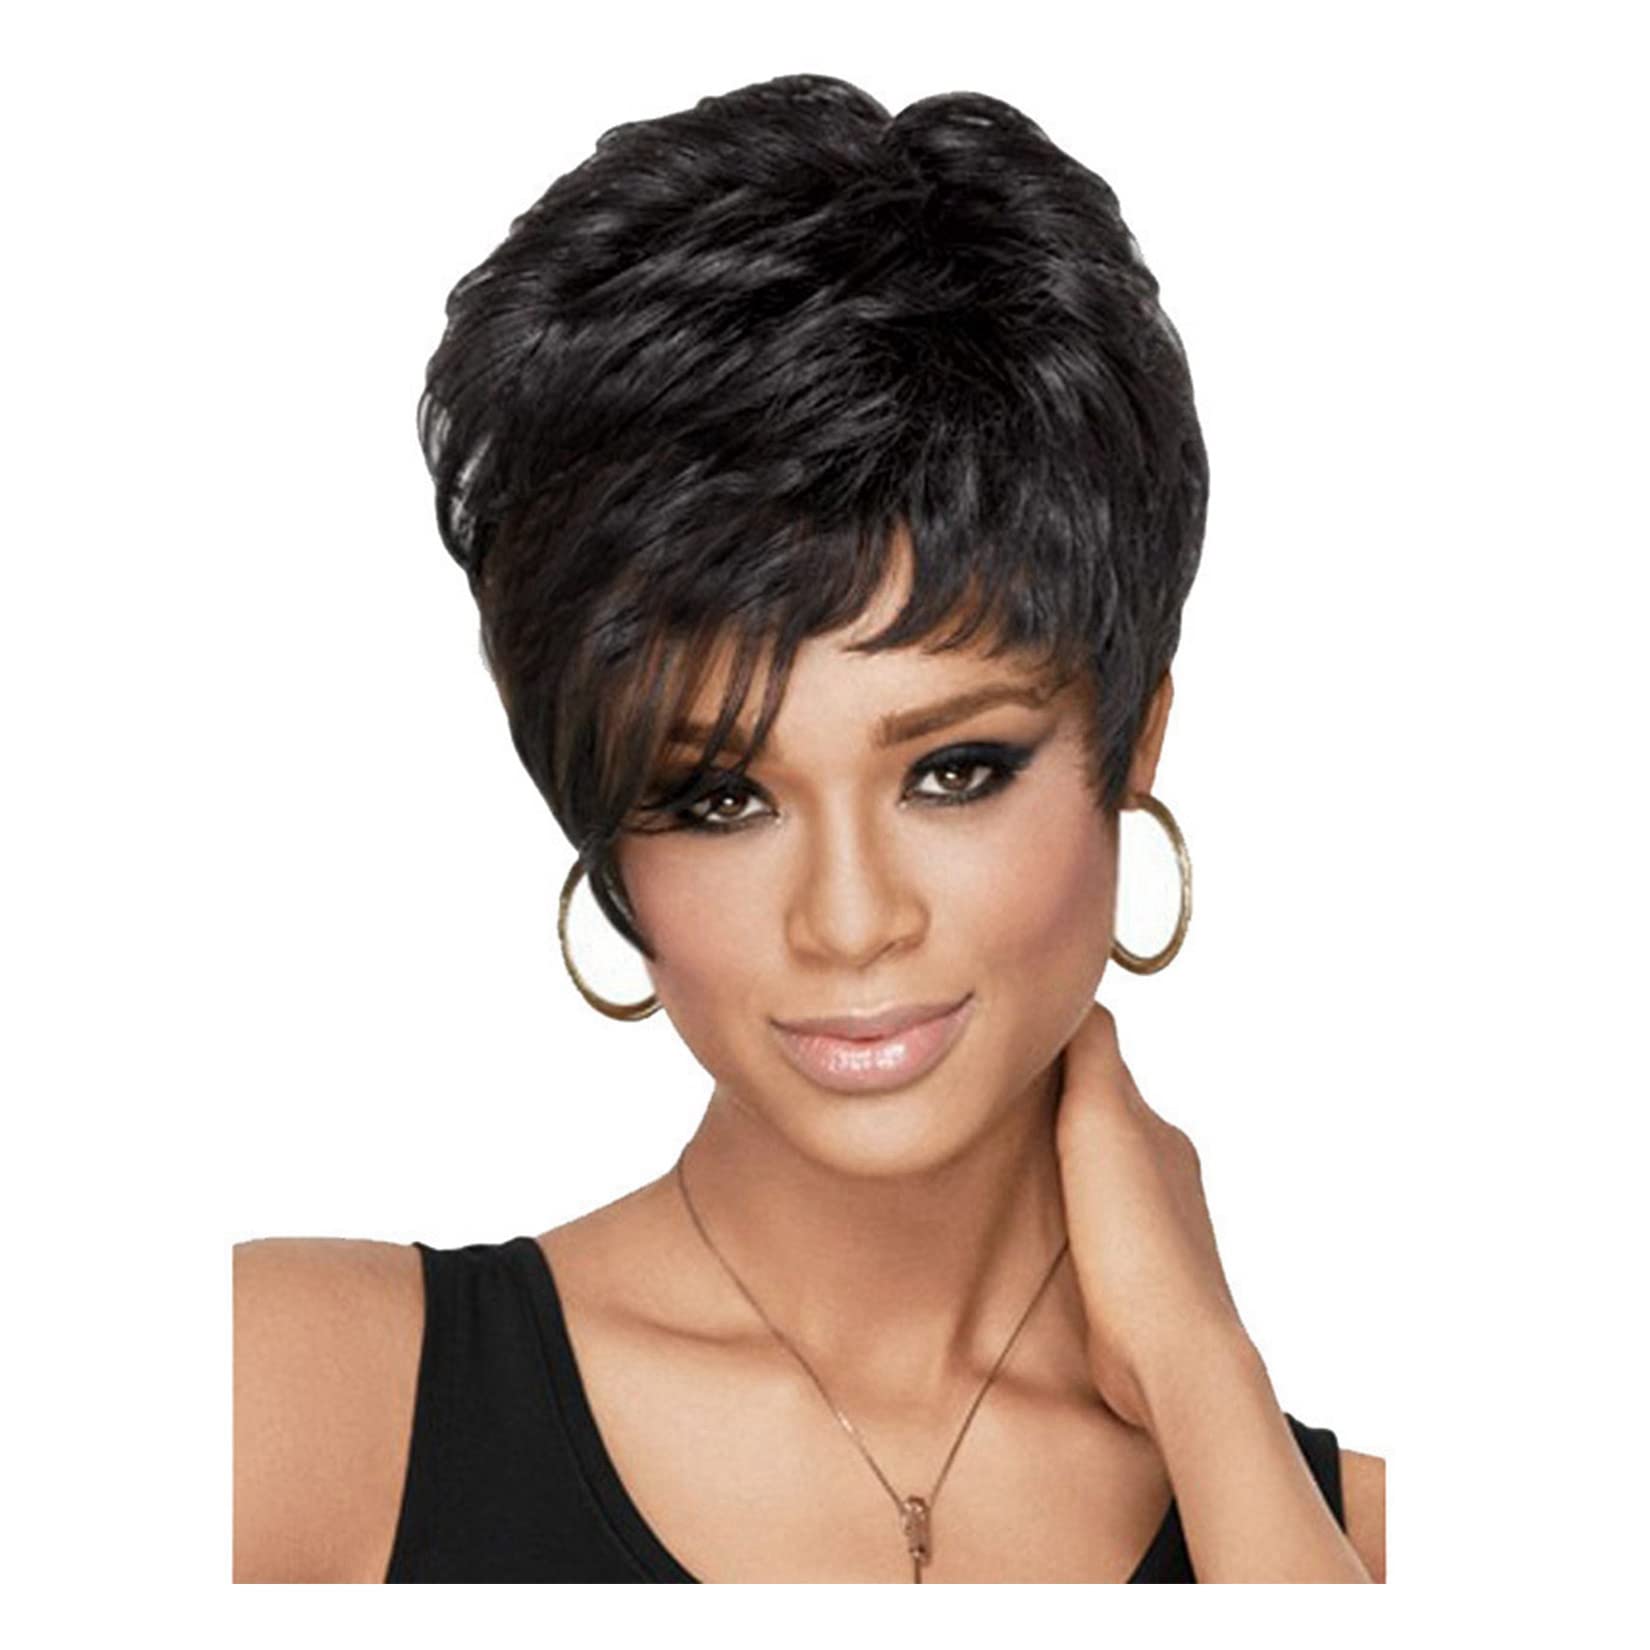 Women's Black Short Curly Hair Wig with Bangs Afro Black Wig Chemical Fiber Hair 15cm 1pcs for Daily Life Party